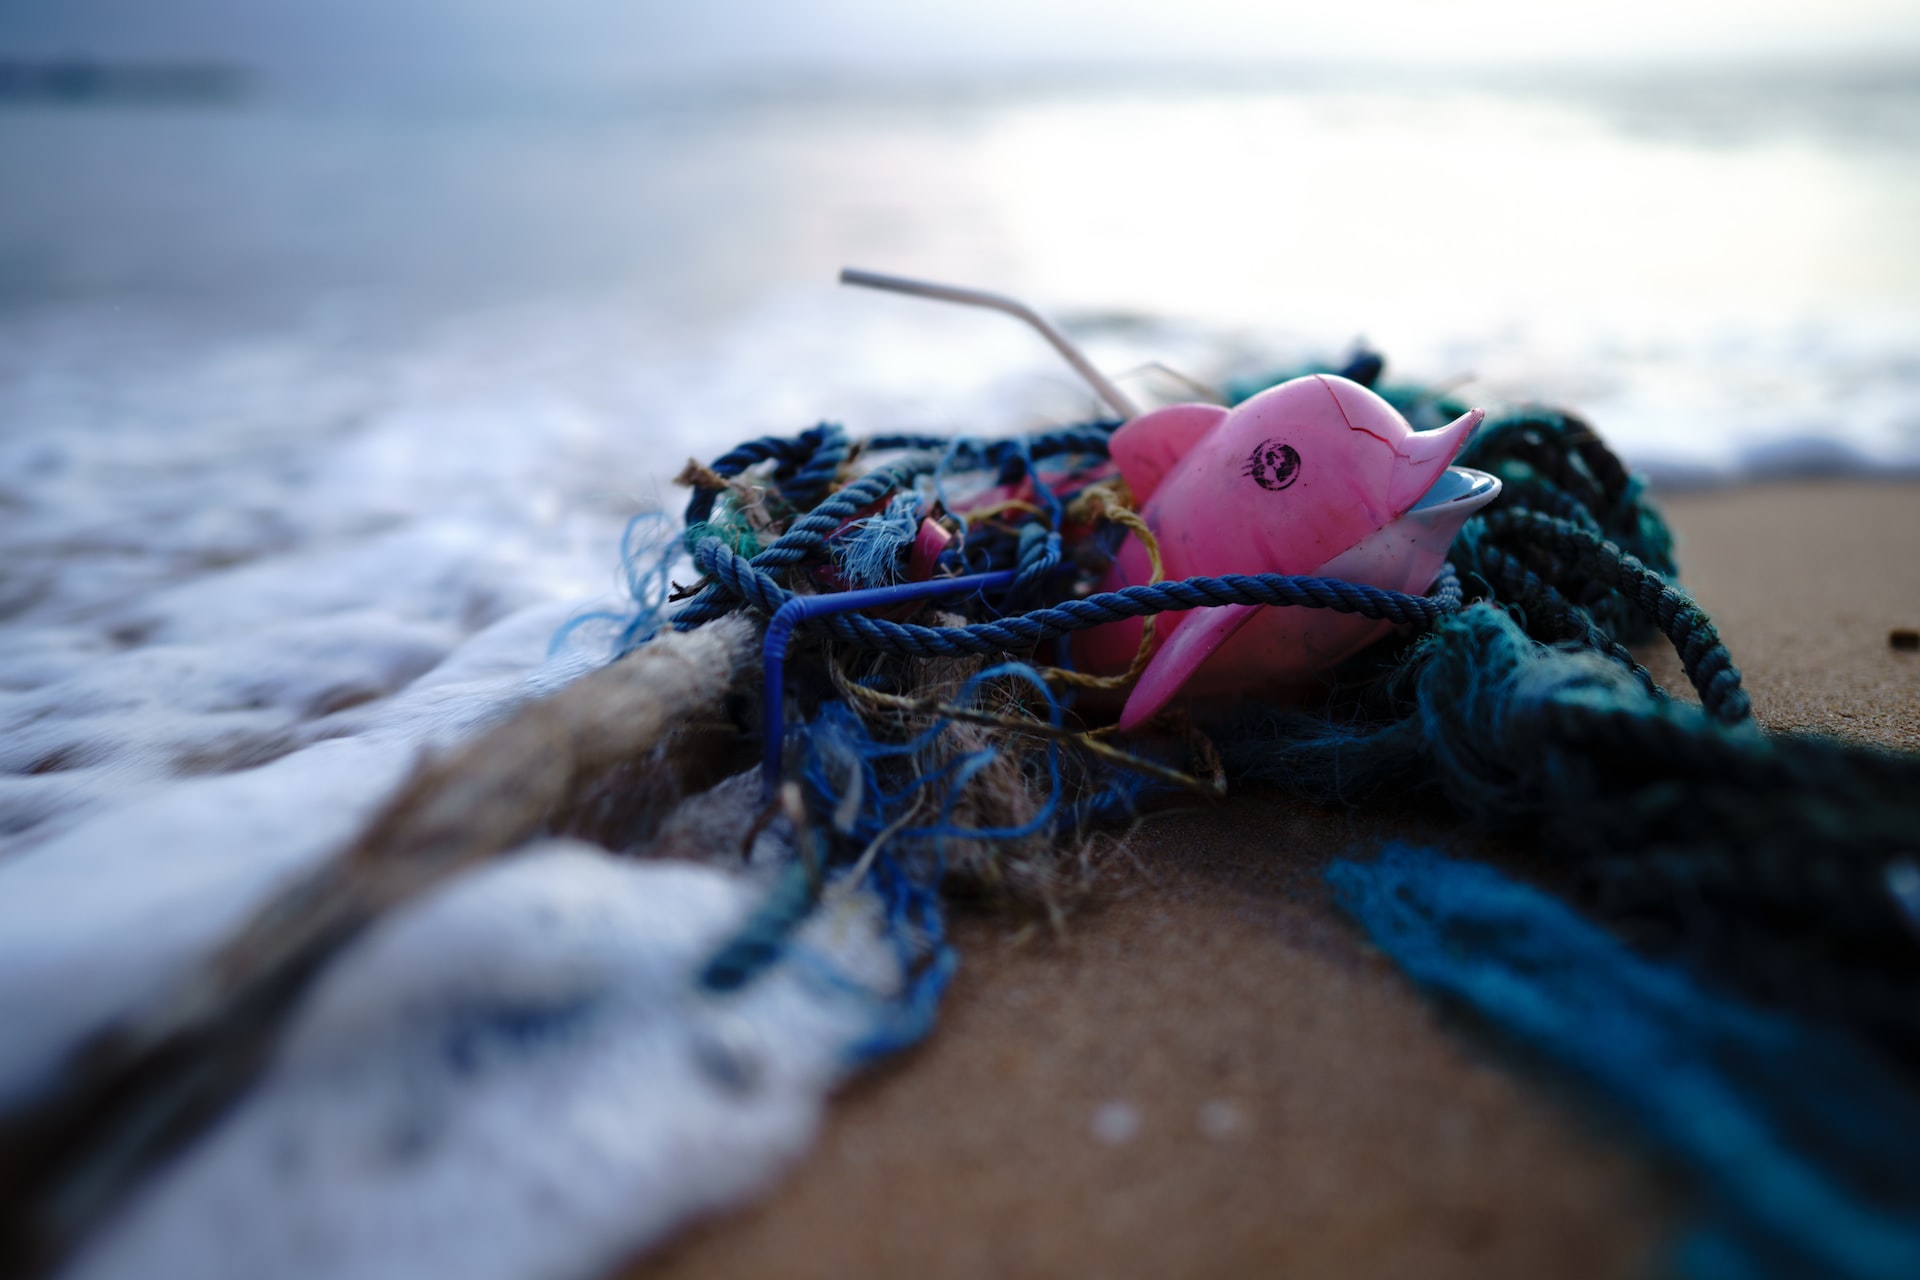 Most Polluting Ocean Plastic Products